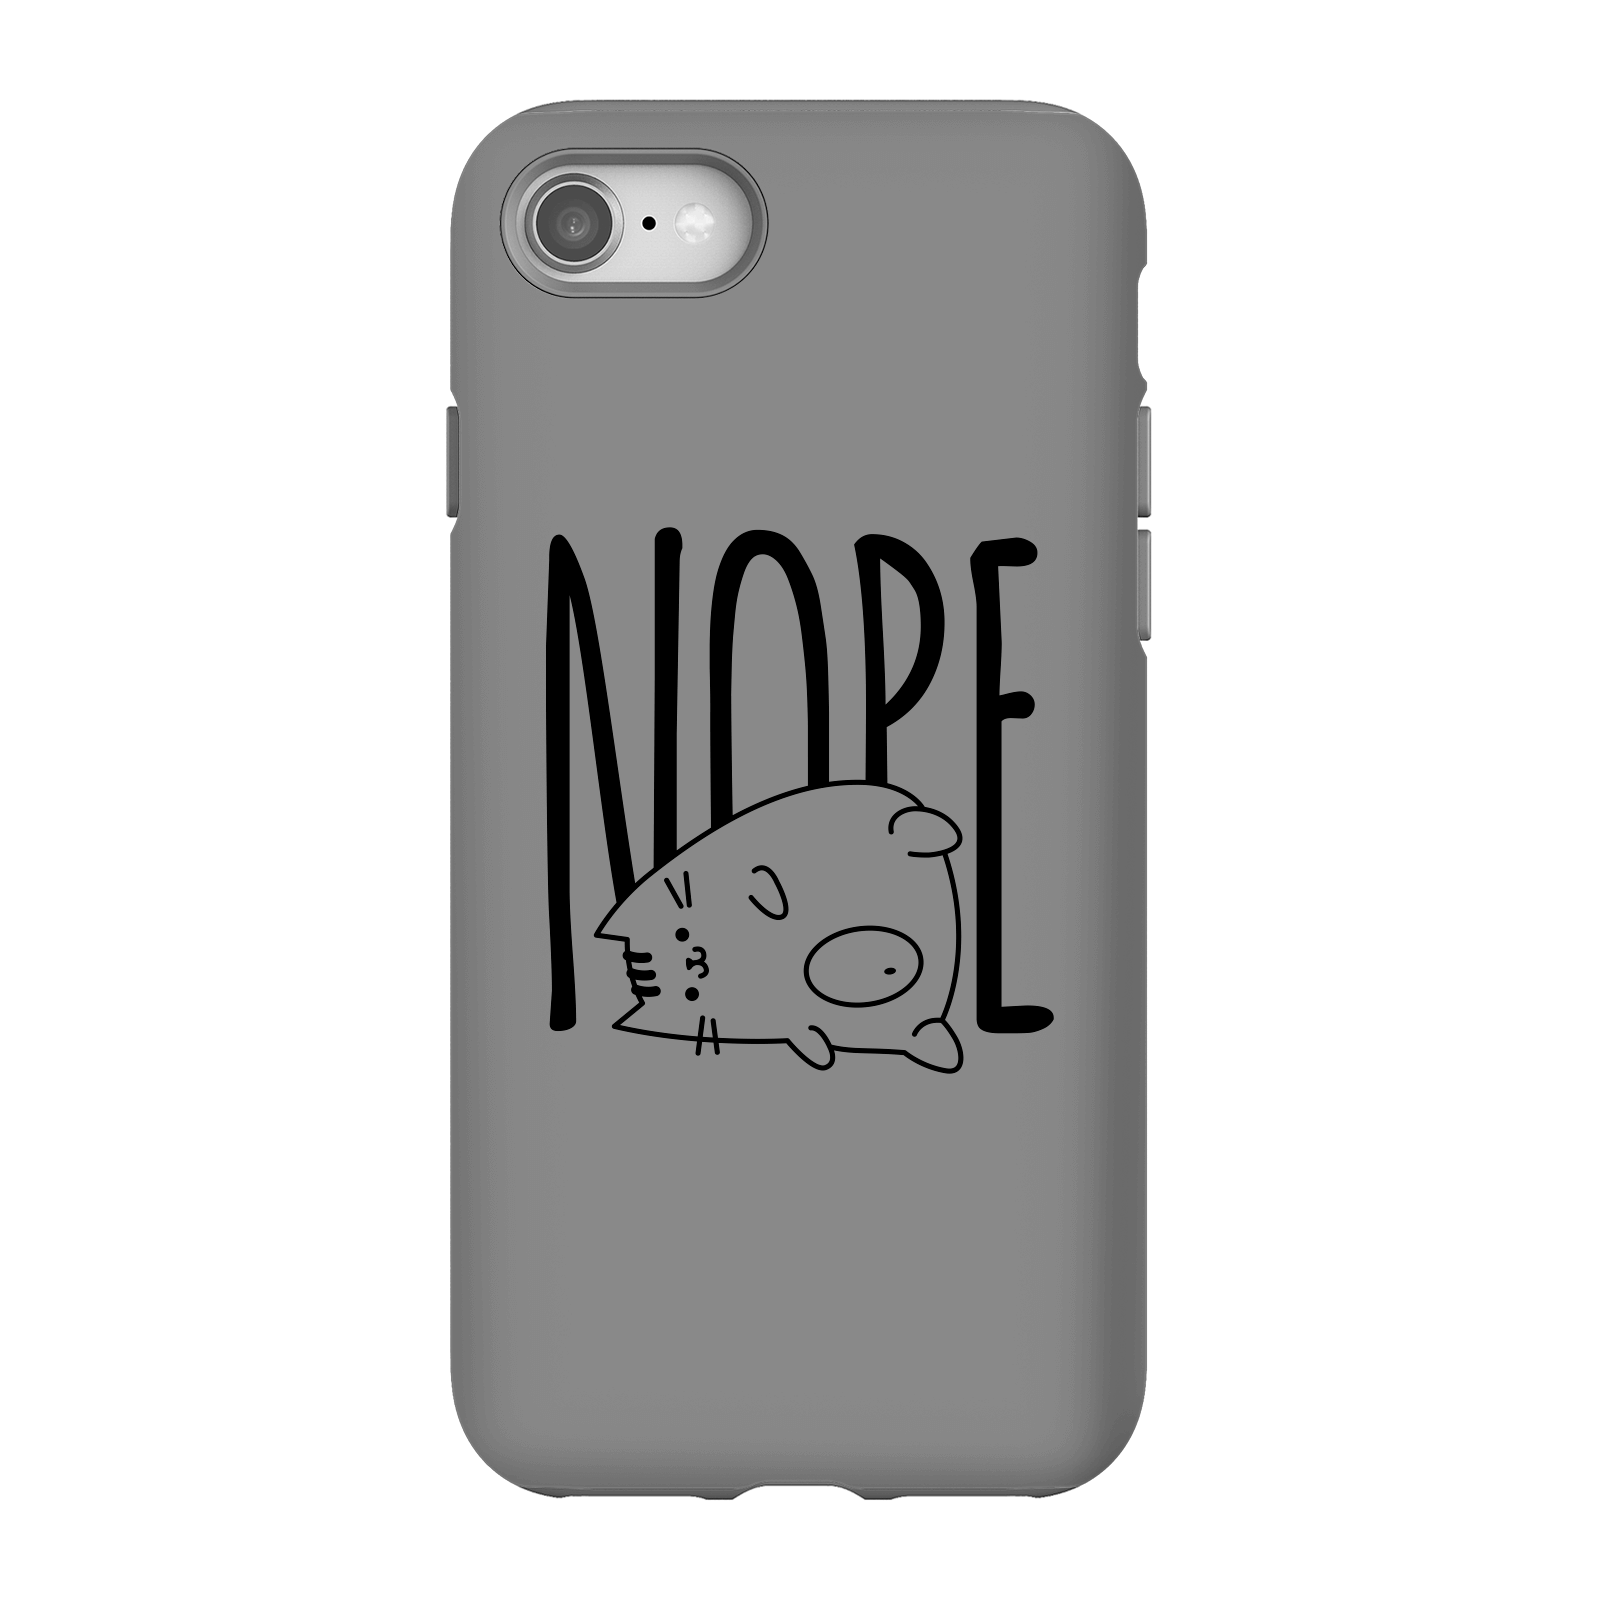 Nope Phone Case for iPhone and Android - iPhone 8 - Tough Case - Matte